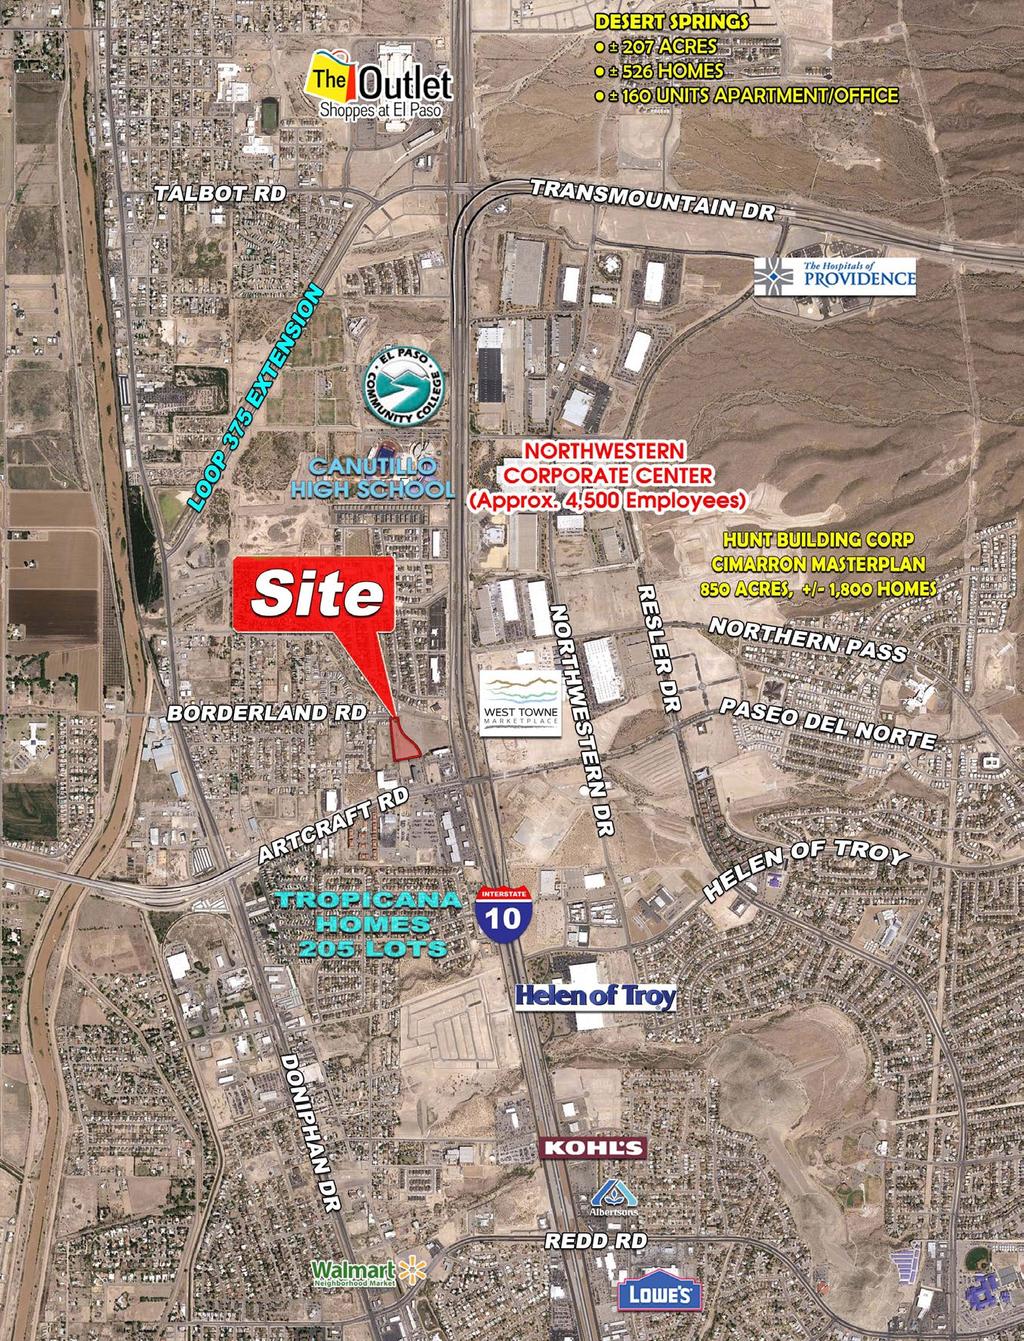 PROPERTY INFORMATION HIGHLIGHTS Land Size: 2.75 Acres (119,786 Sq. Ft.) Sales Price: $12.00 per Sq. Ft. Zoning: C-4 SPC $8.